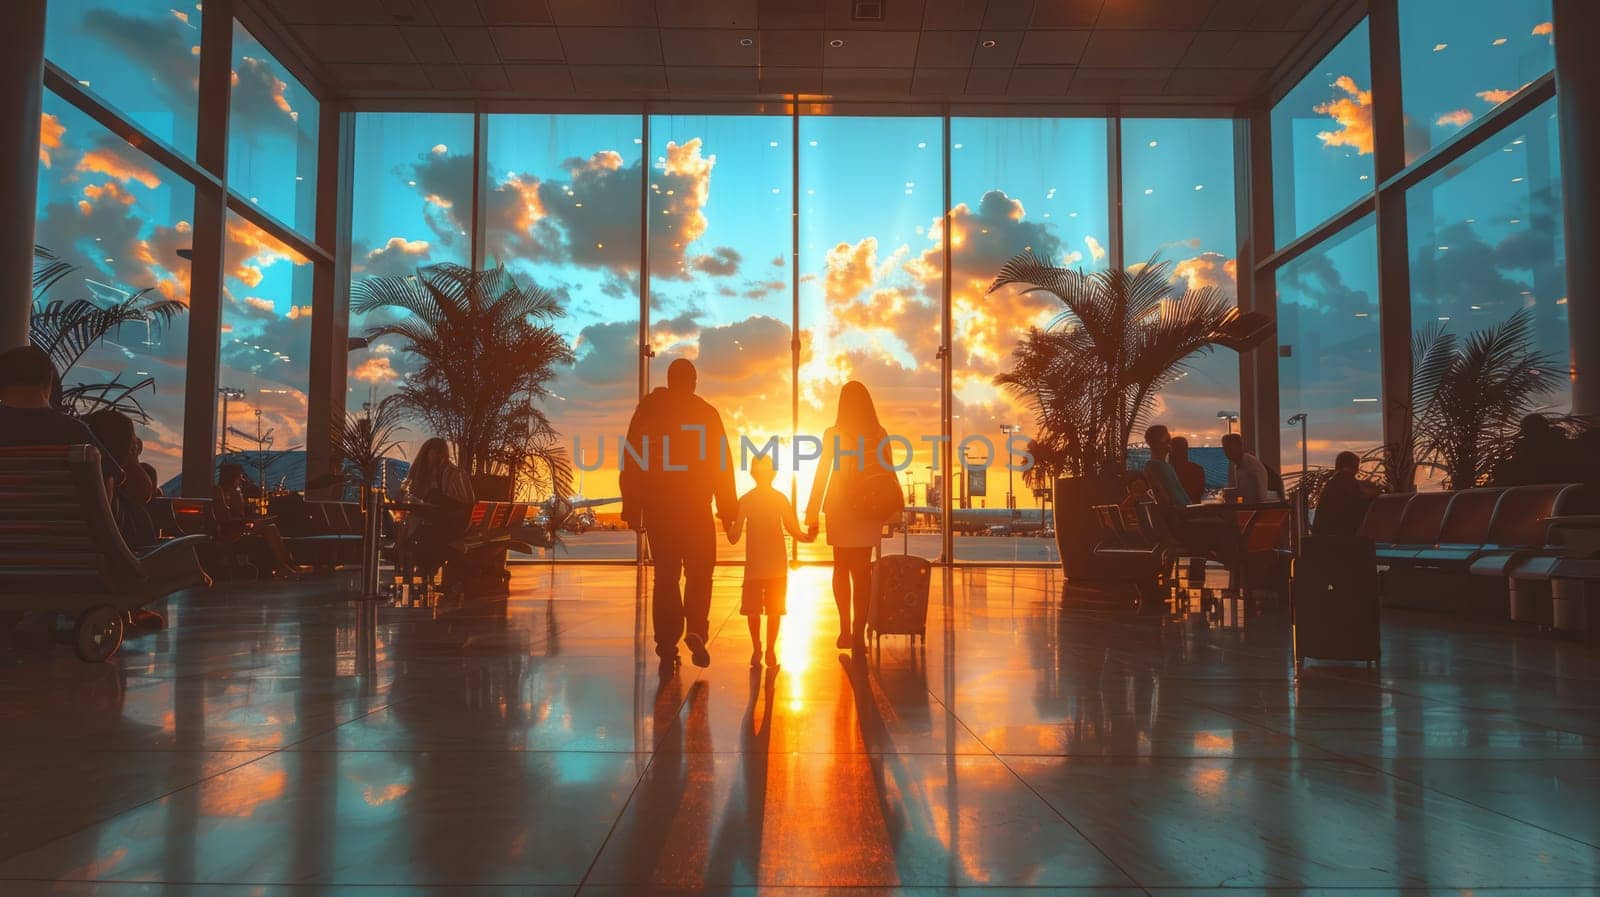 Silhouette of a family at the airport with a plane in the background at sunset by NataliPopova